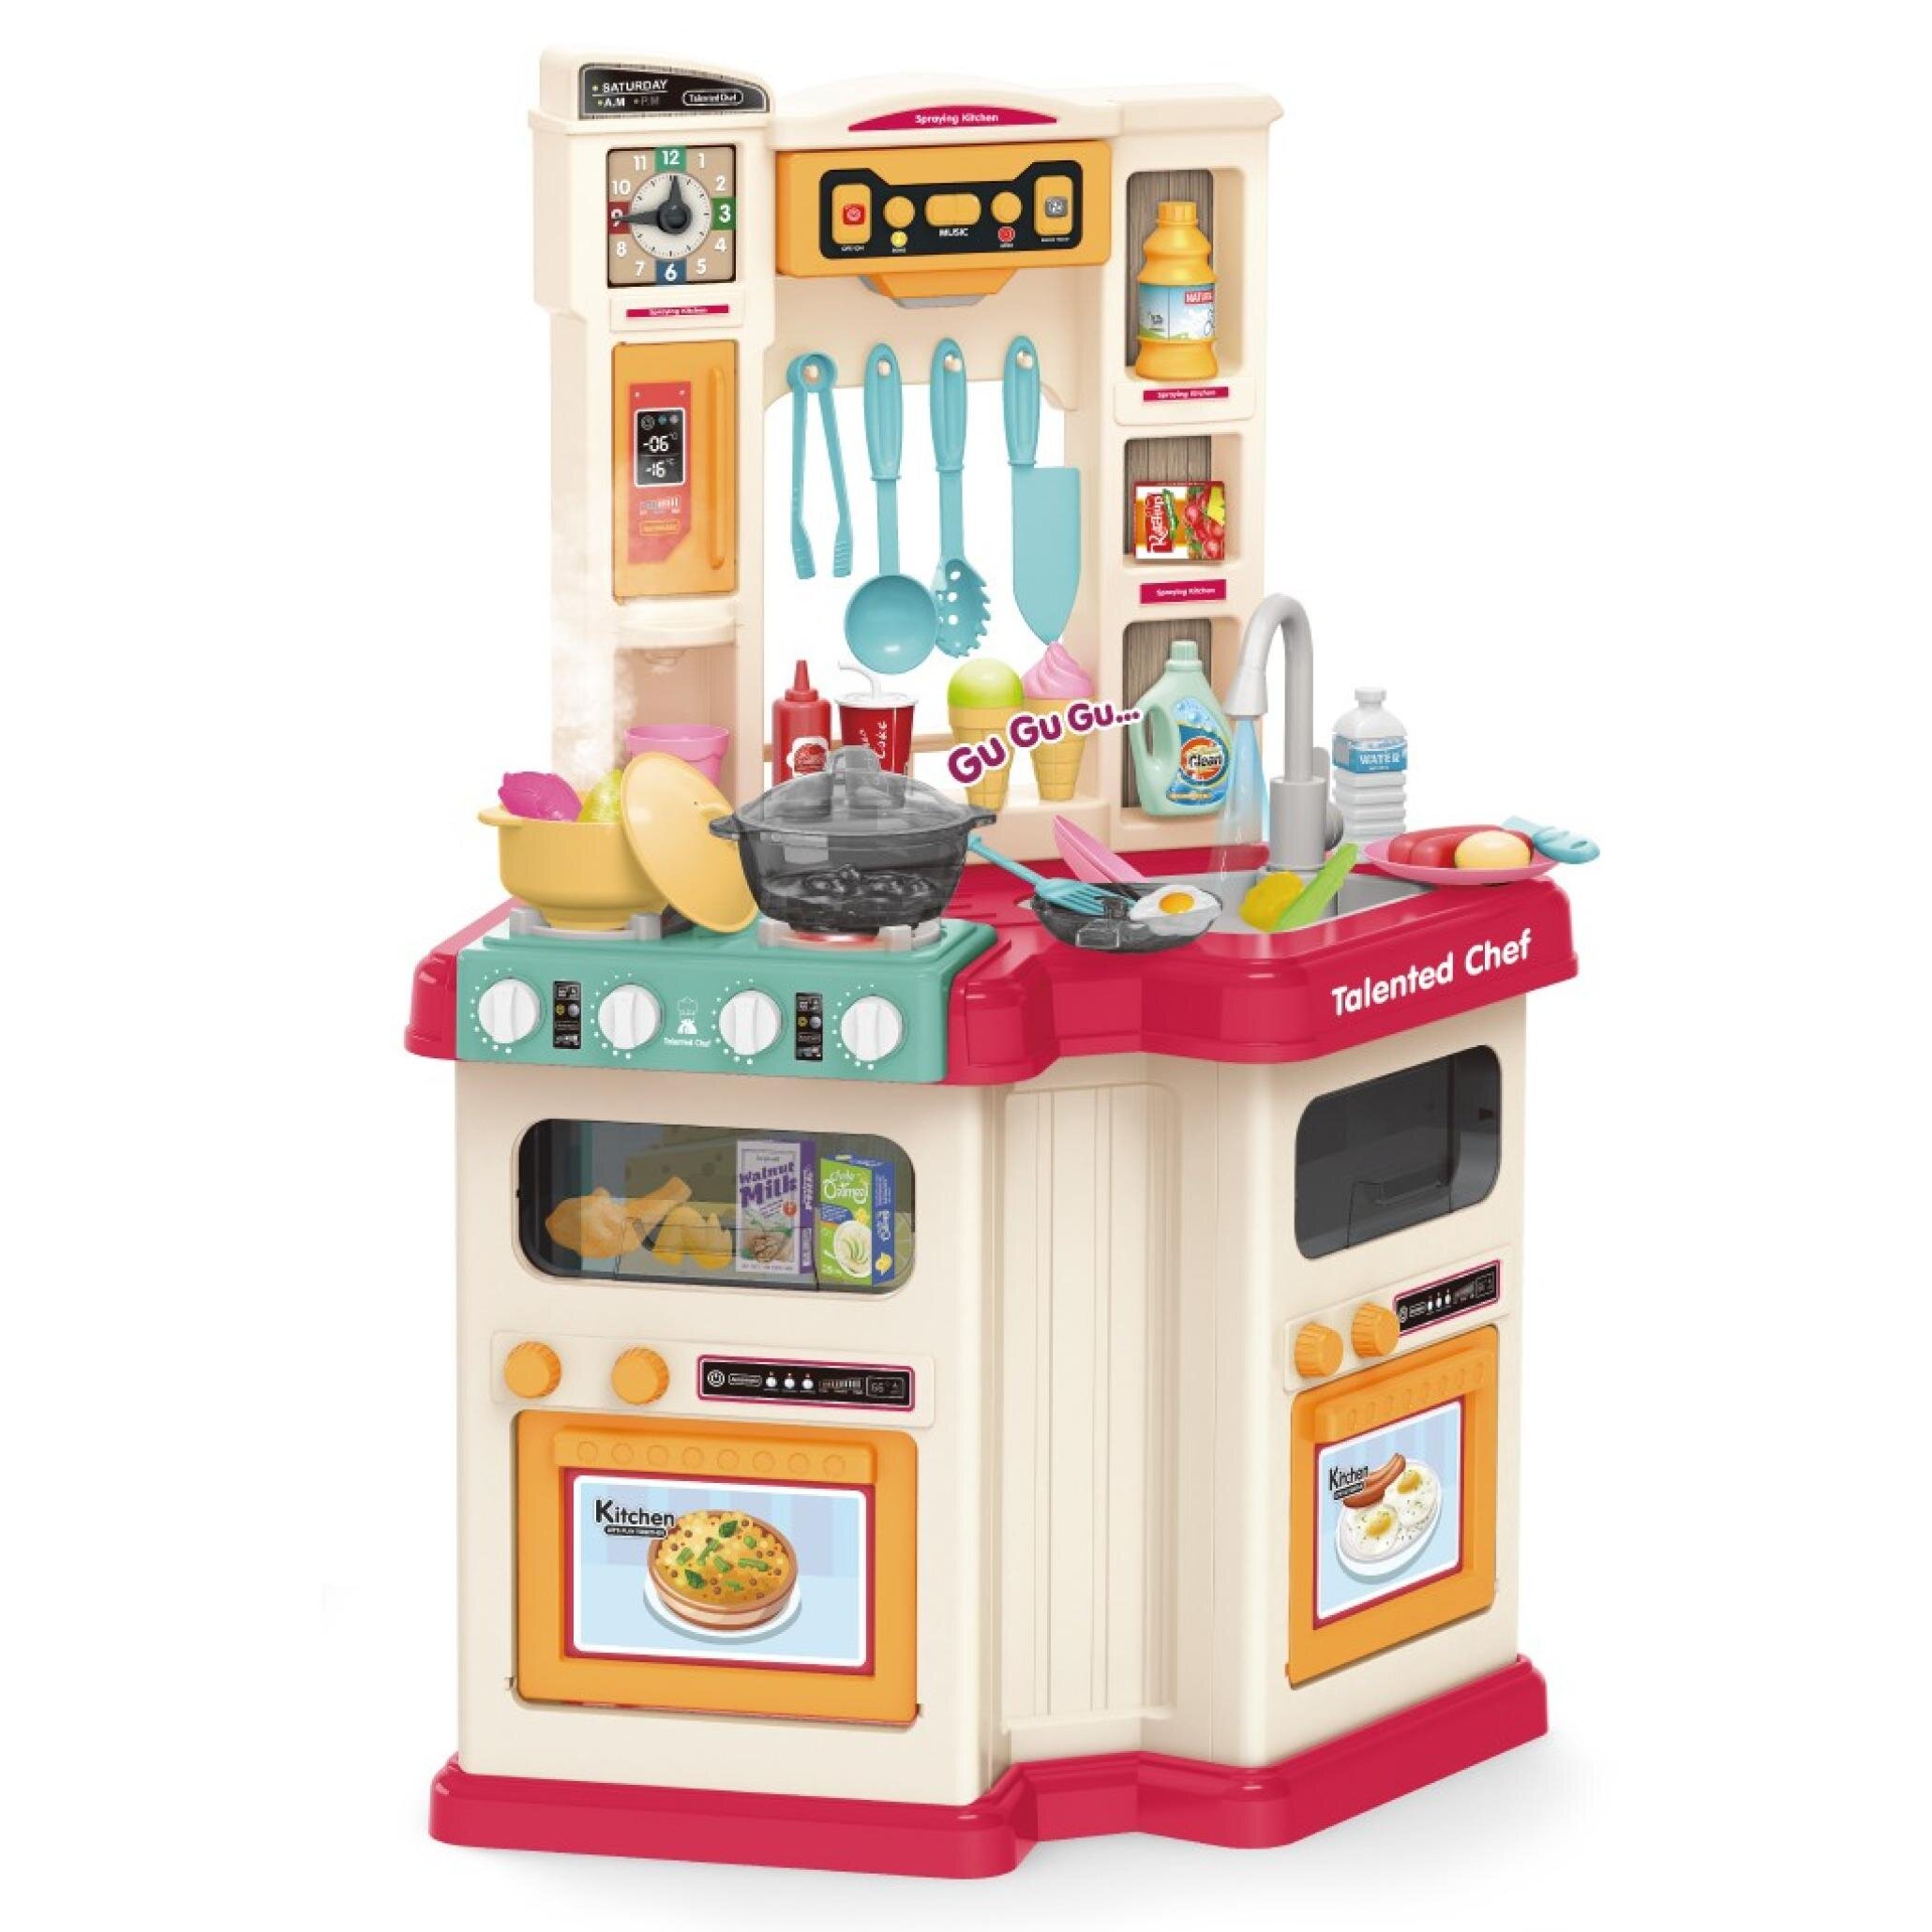 Kitchen Pretend Set Stove Oven Kids Toy Cooking Chef Role Play Kits Xmas Gift 